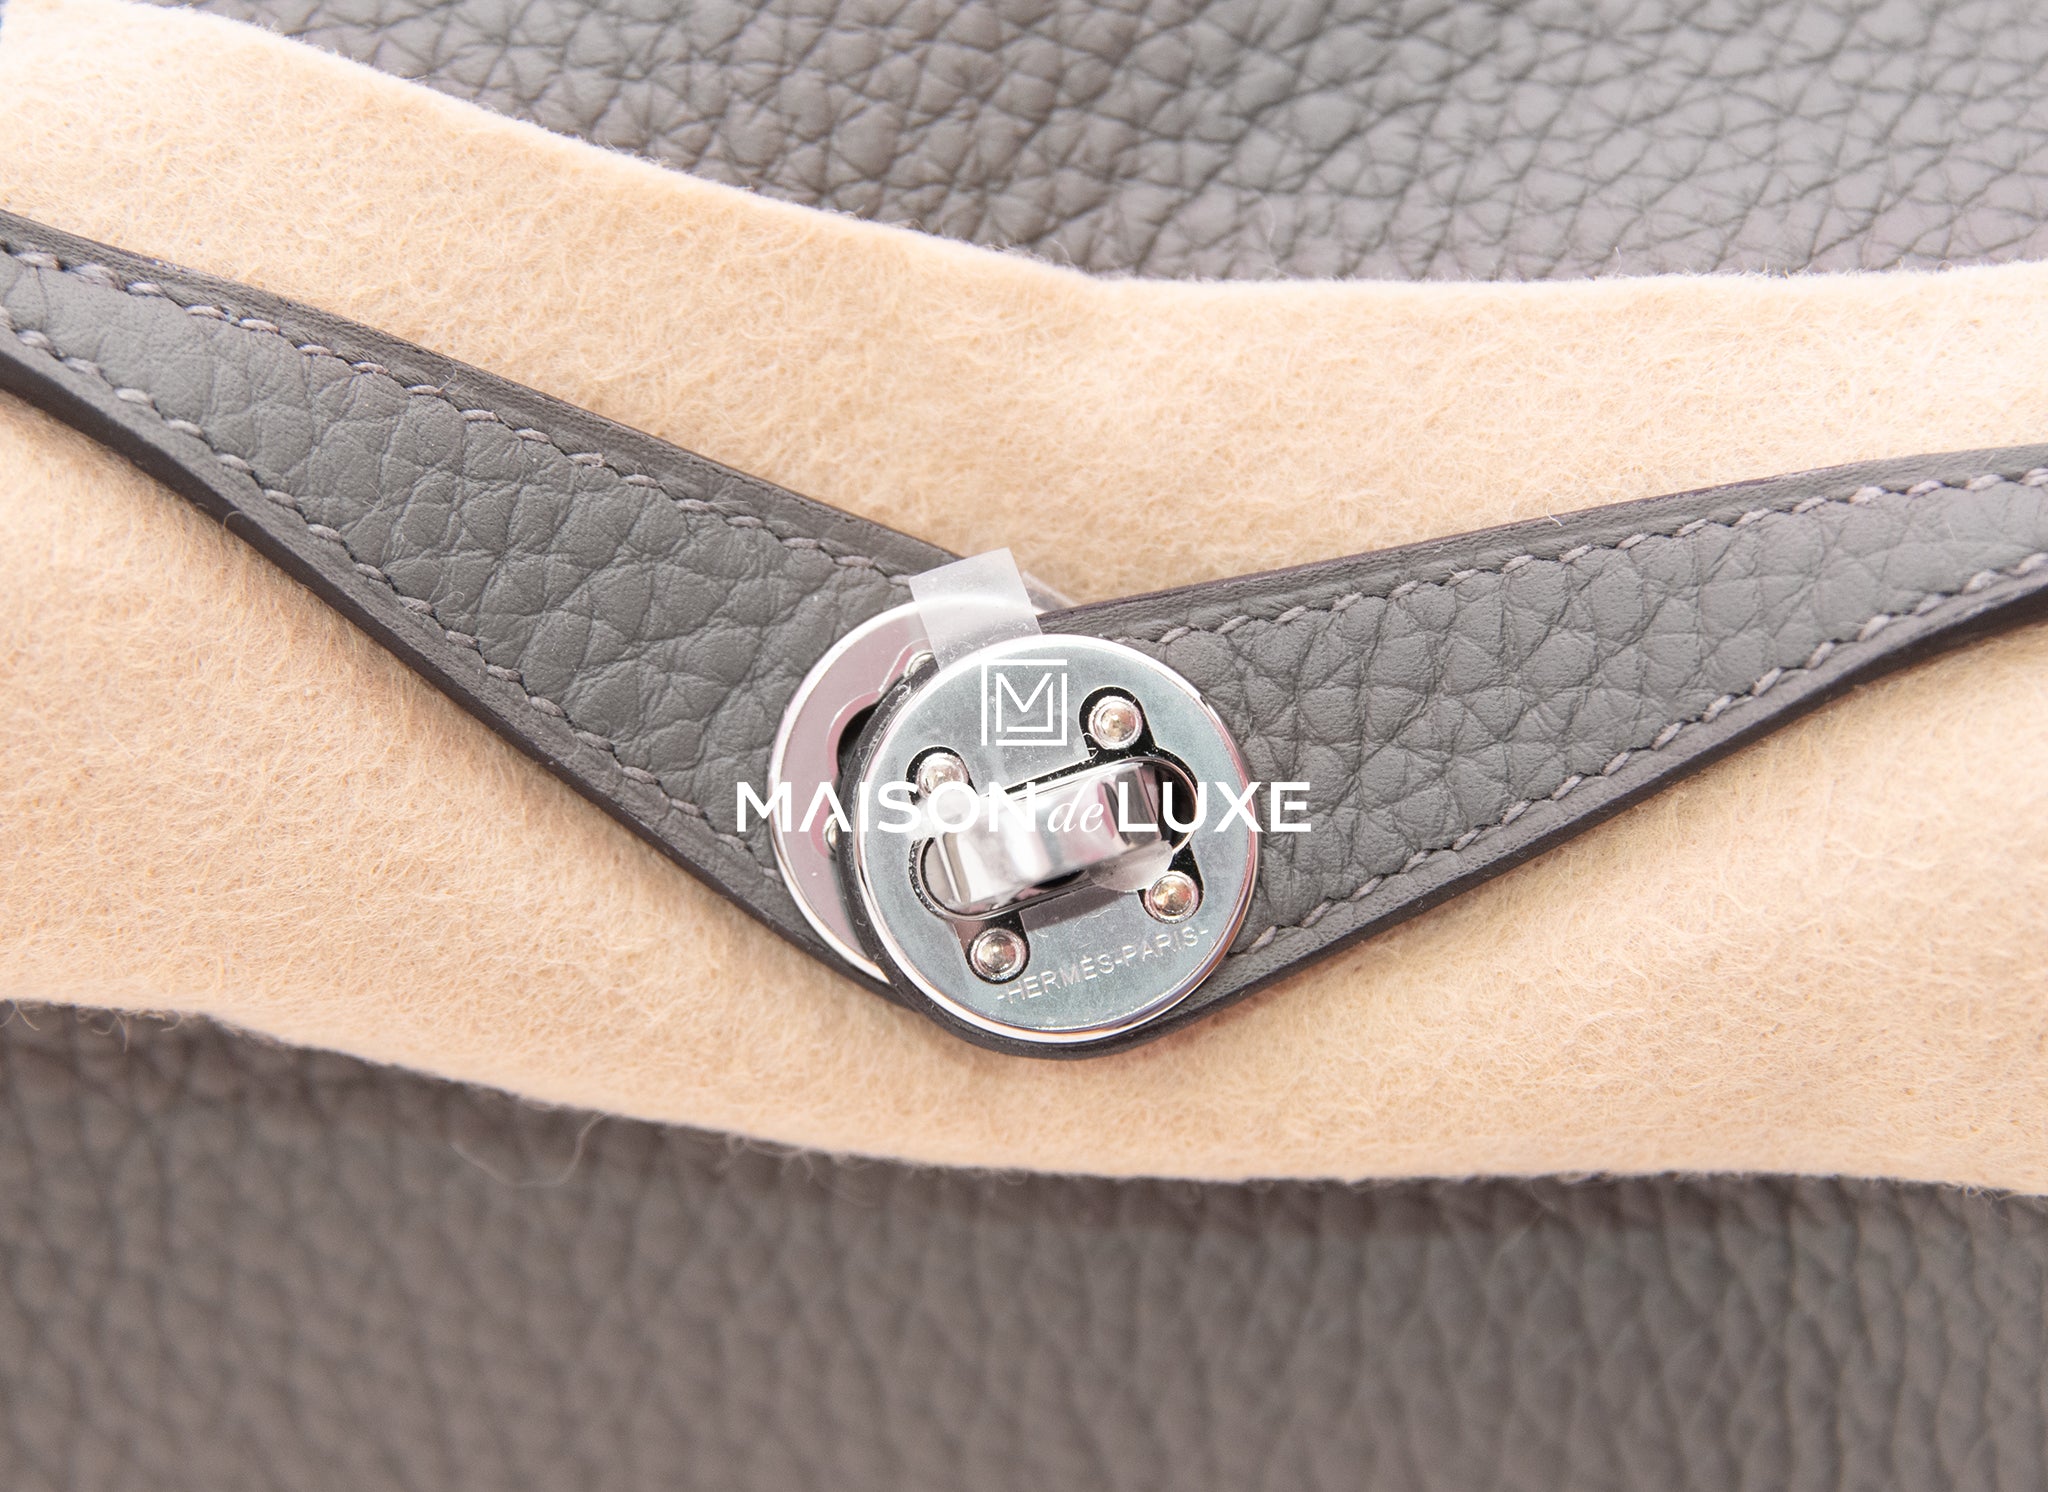 HERMES Mini Lindy Clemence Gris Etain PHW *New - Timeless Luxuries